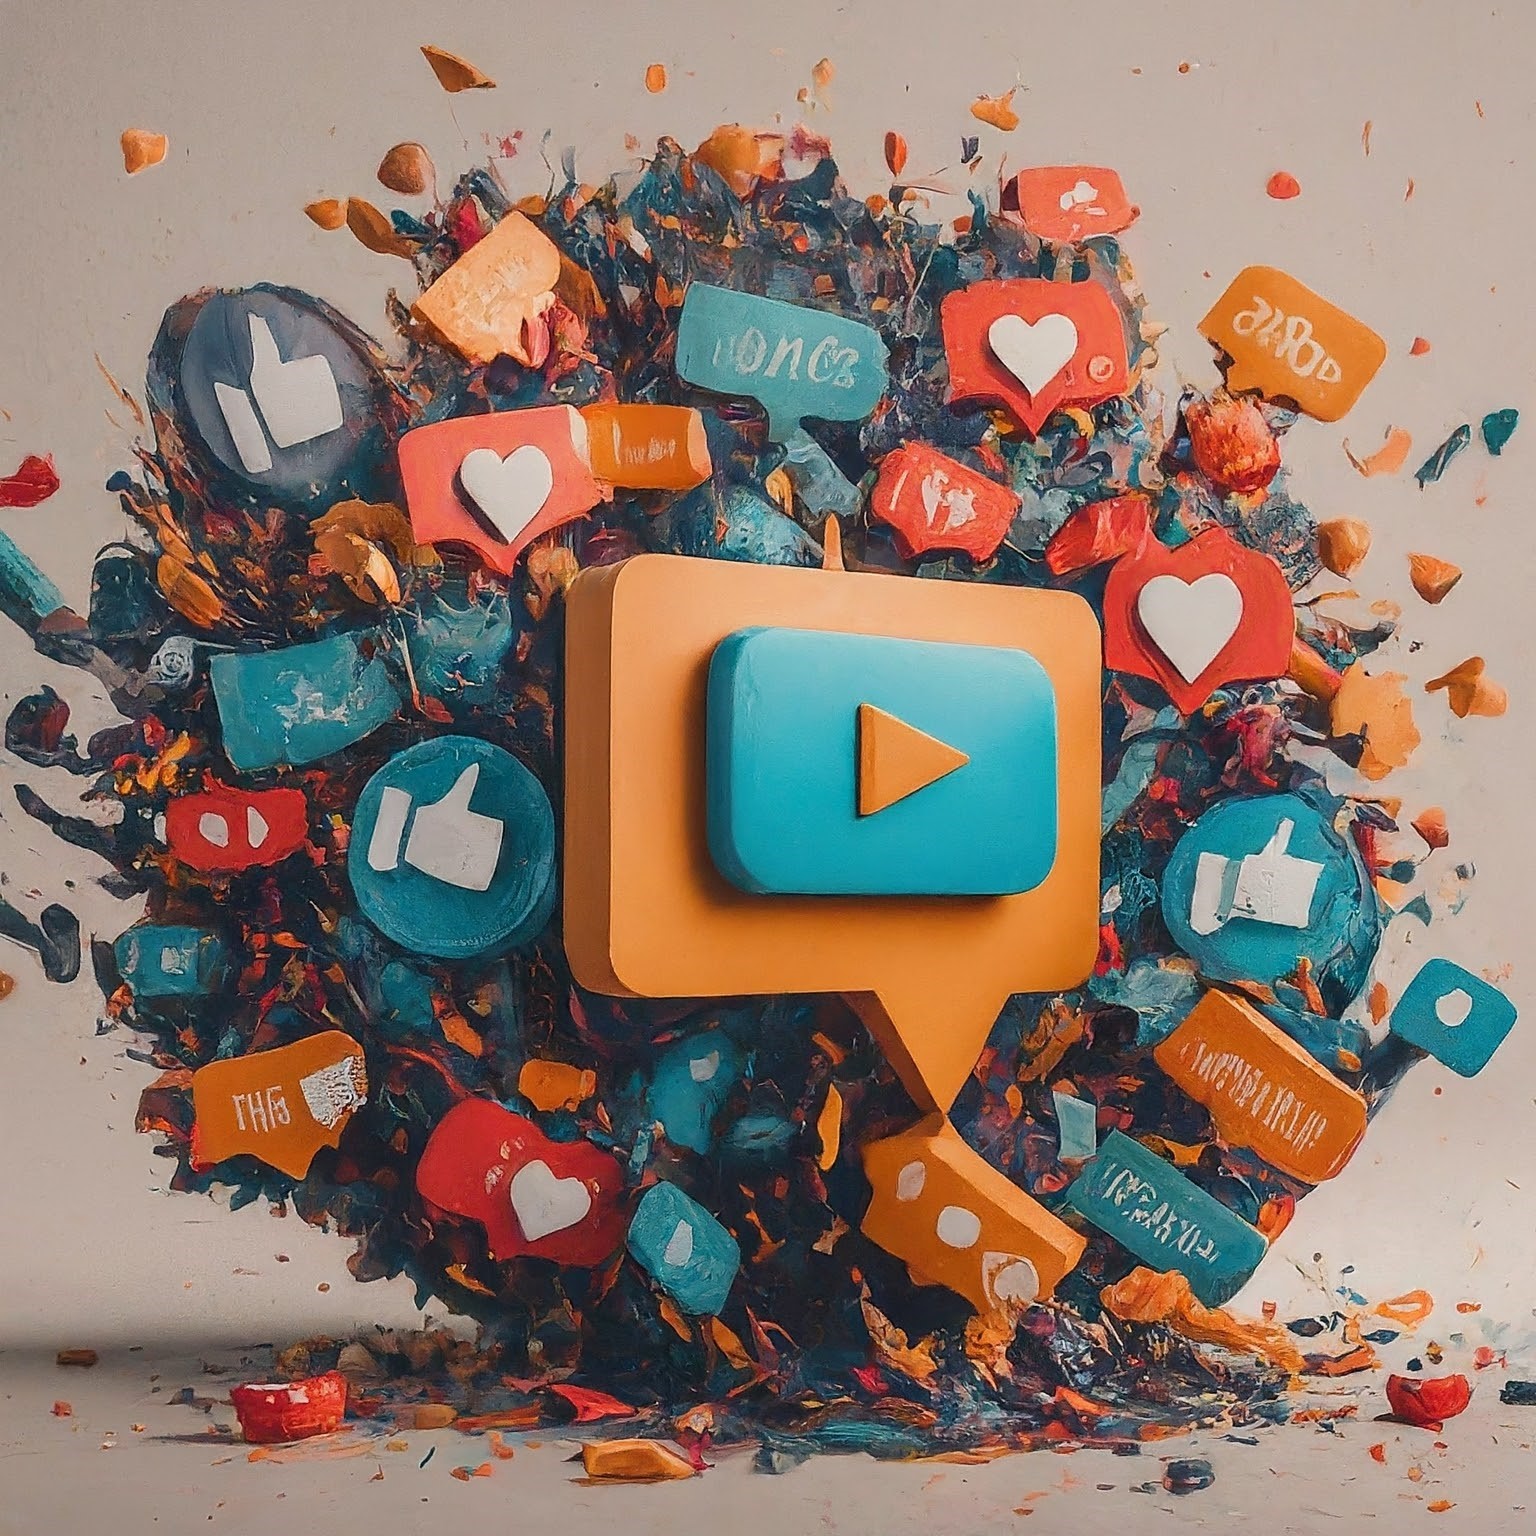 Captivate Your Audience: Why Video Reigns Supreme on Social Media